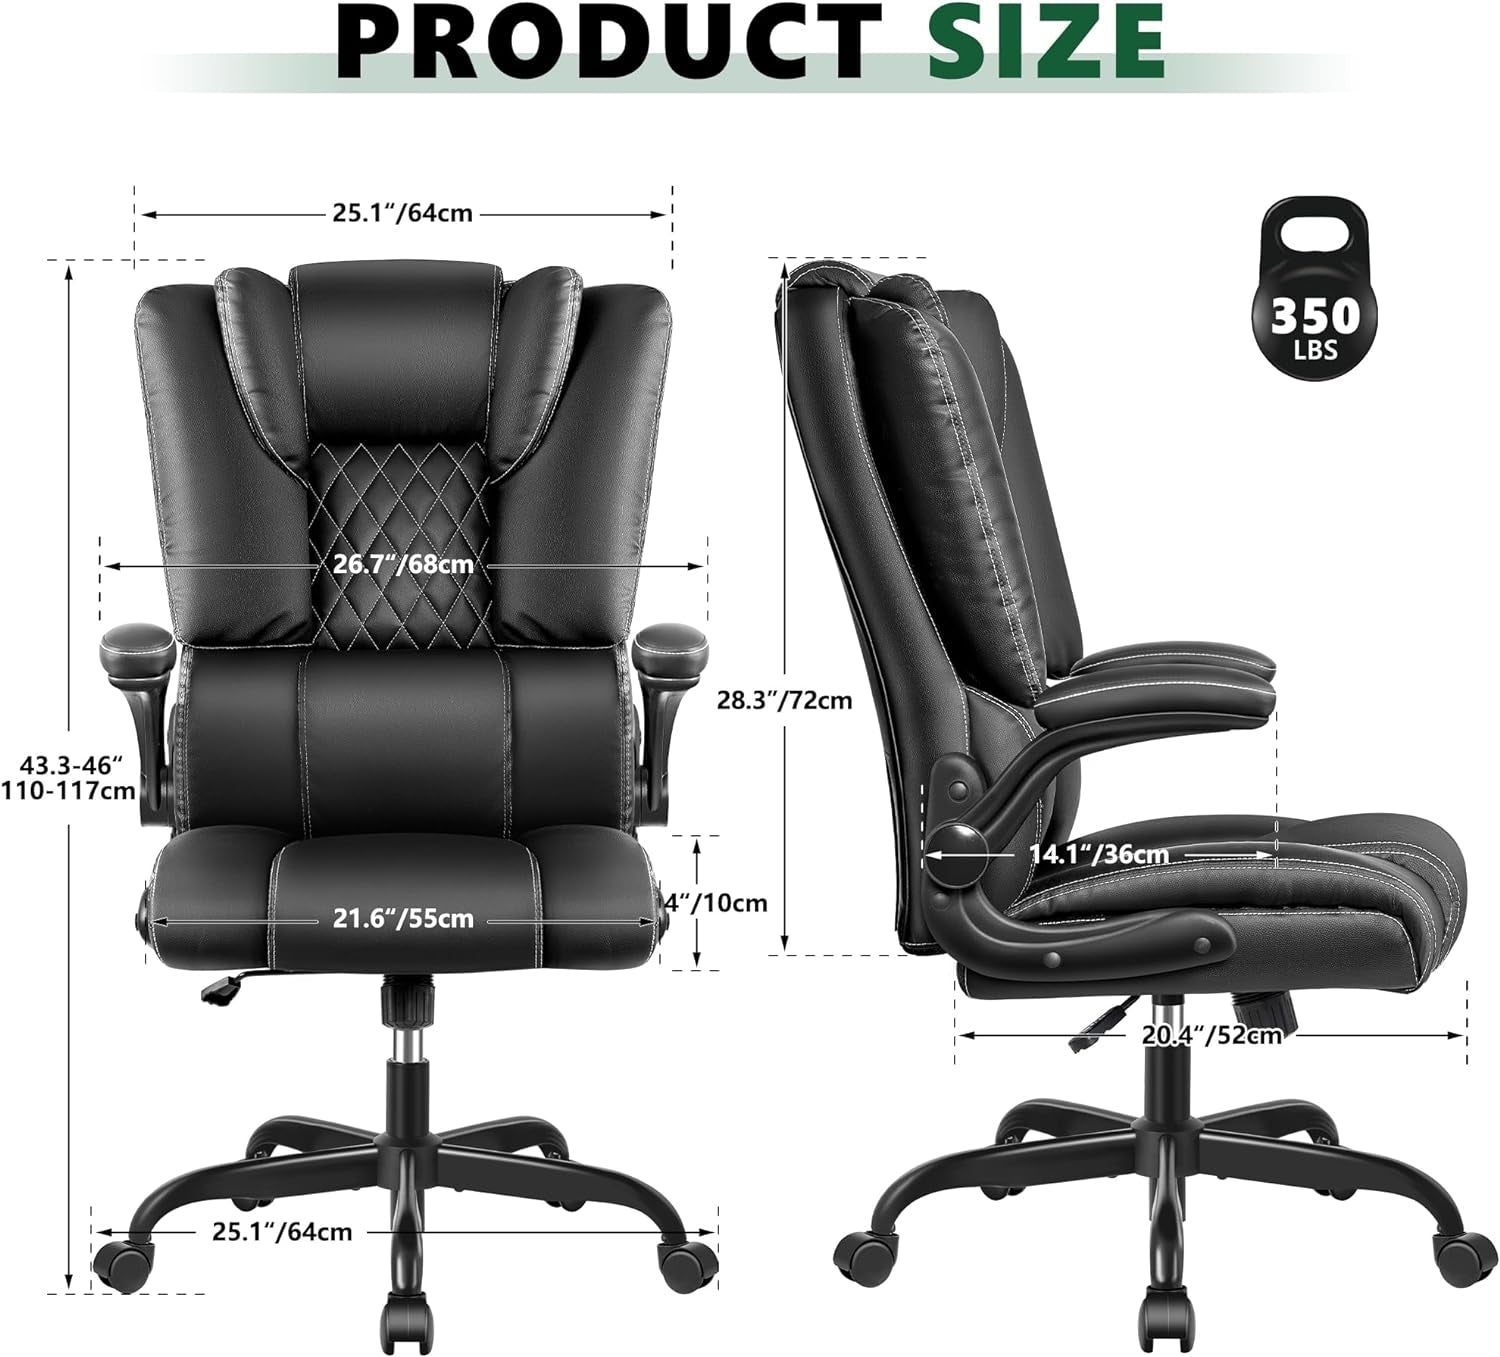 Office Chair,Executive Leather Chair Home Office Desk Chairs Ergonomic High Back with Lumbar Suppor Computer Chair Adjustable Flip-Up Armrest Swivel Rolling Chair with Rocking Function(Black